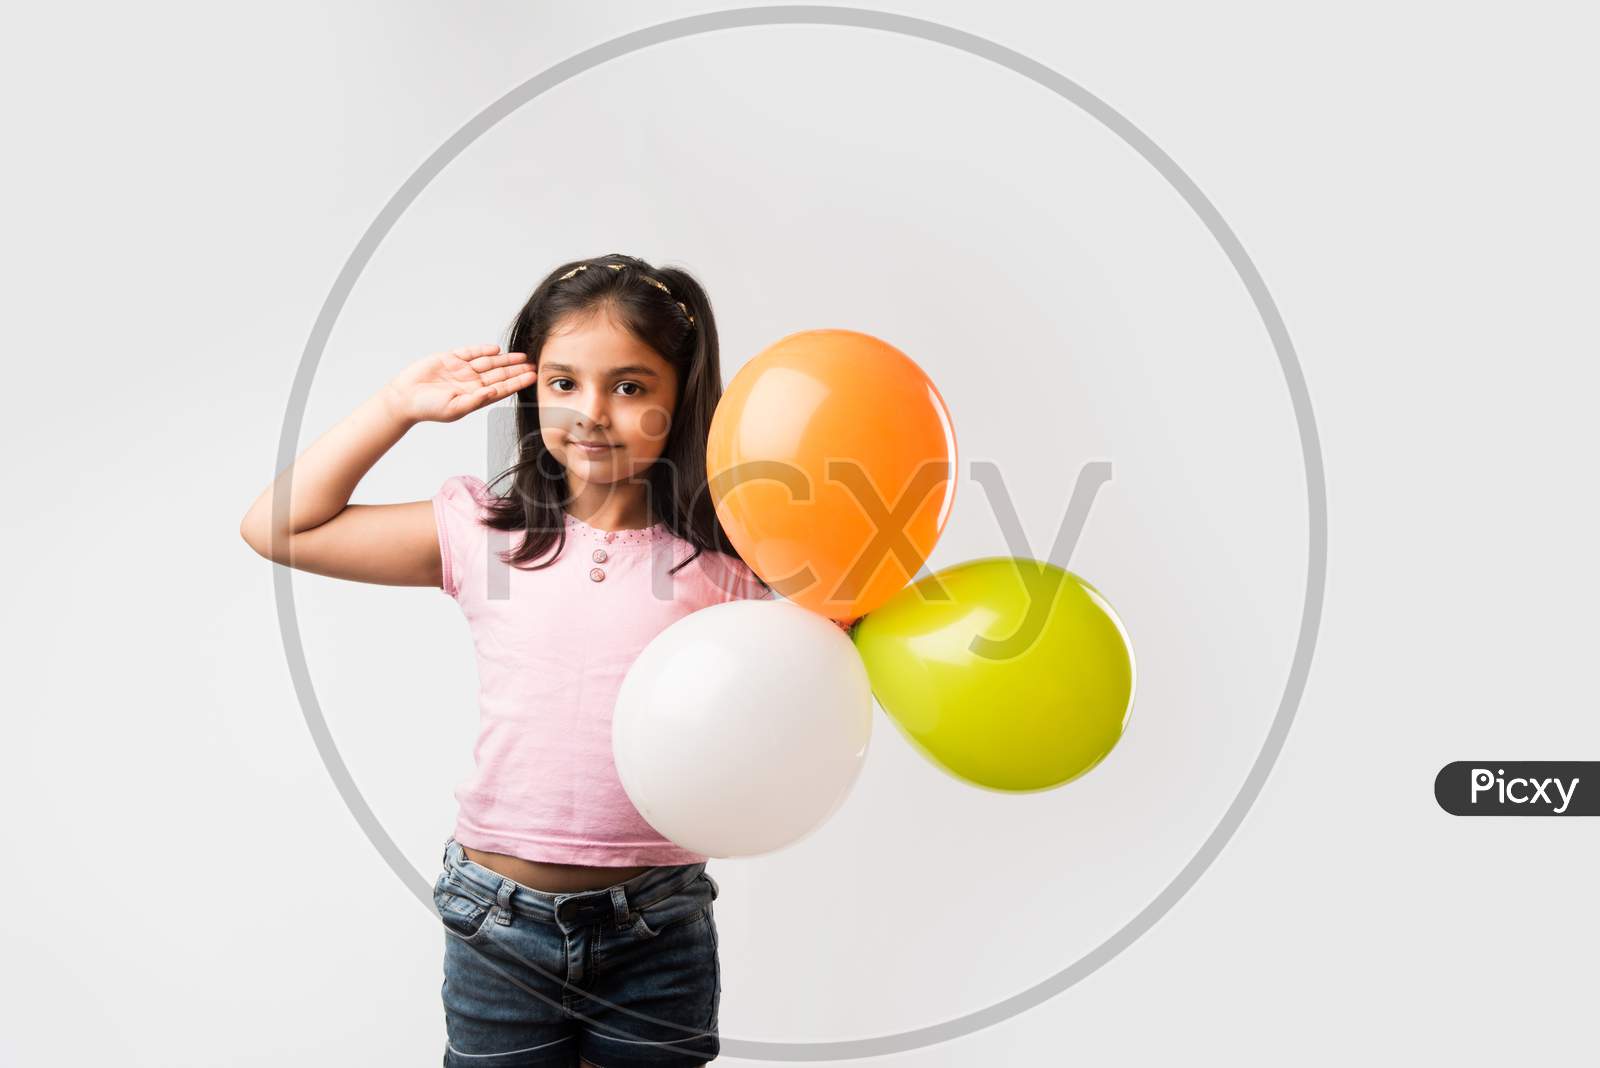 cute little indian girl with tri colour balloons - Saluting national Flag and celebrating Independence or Republic day of India